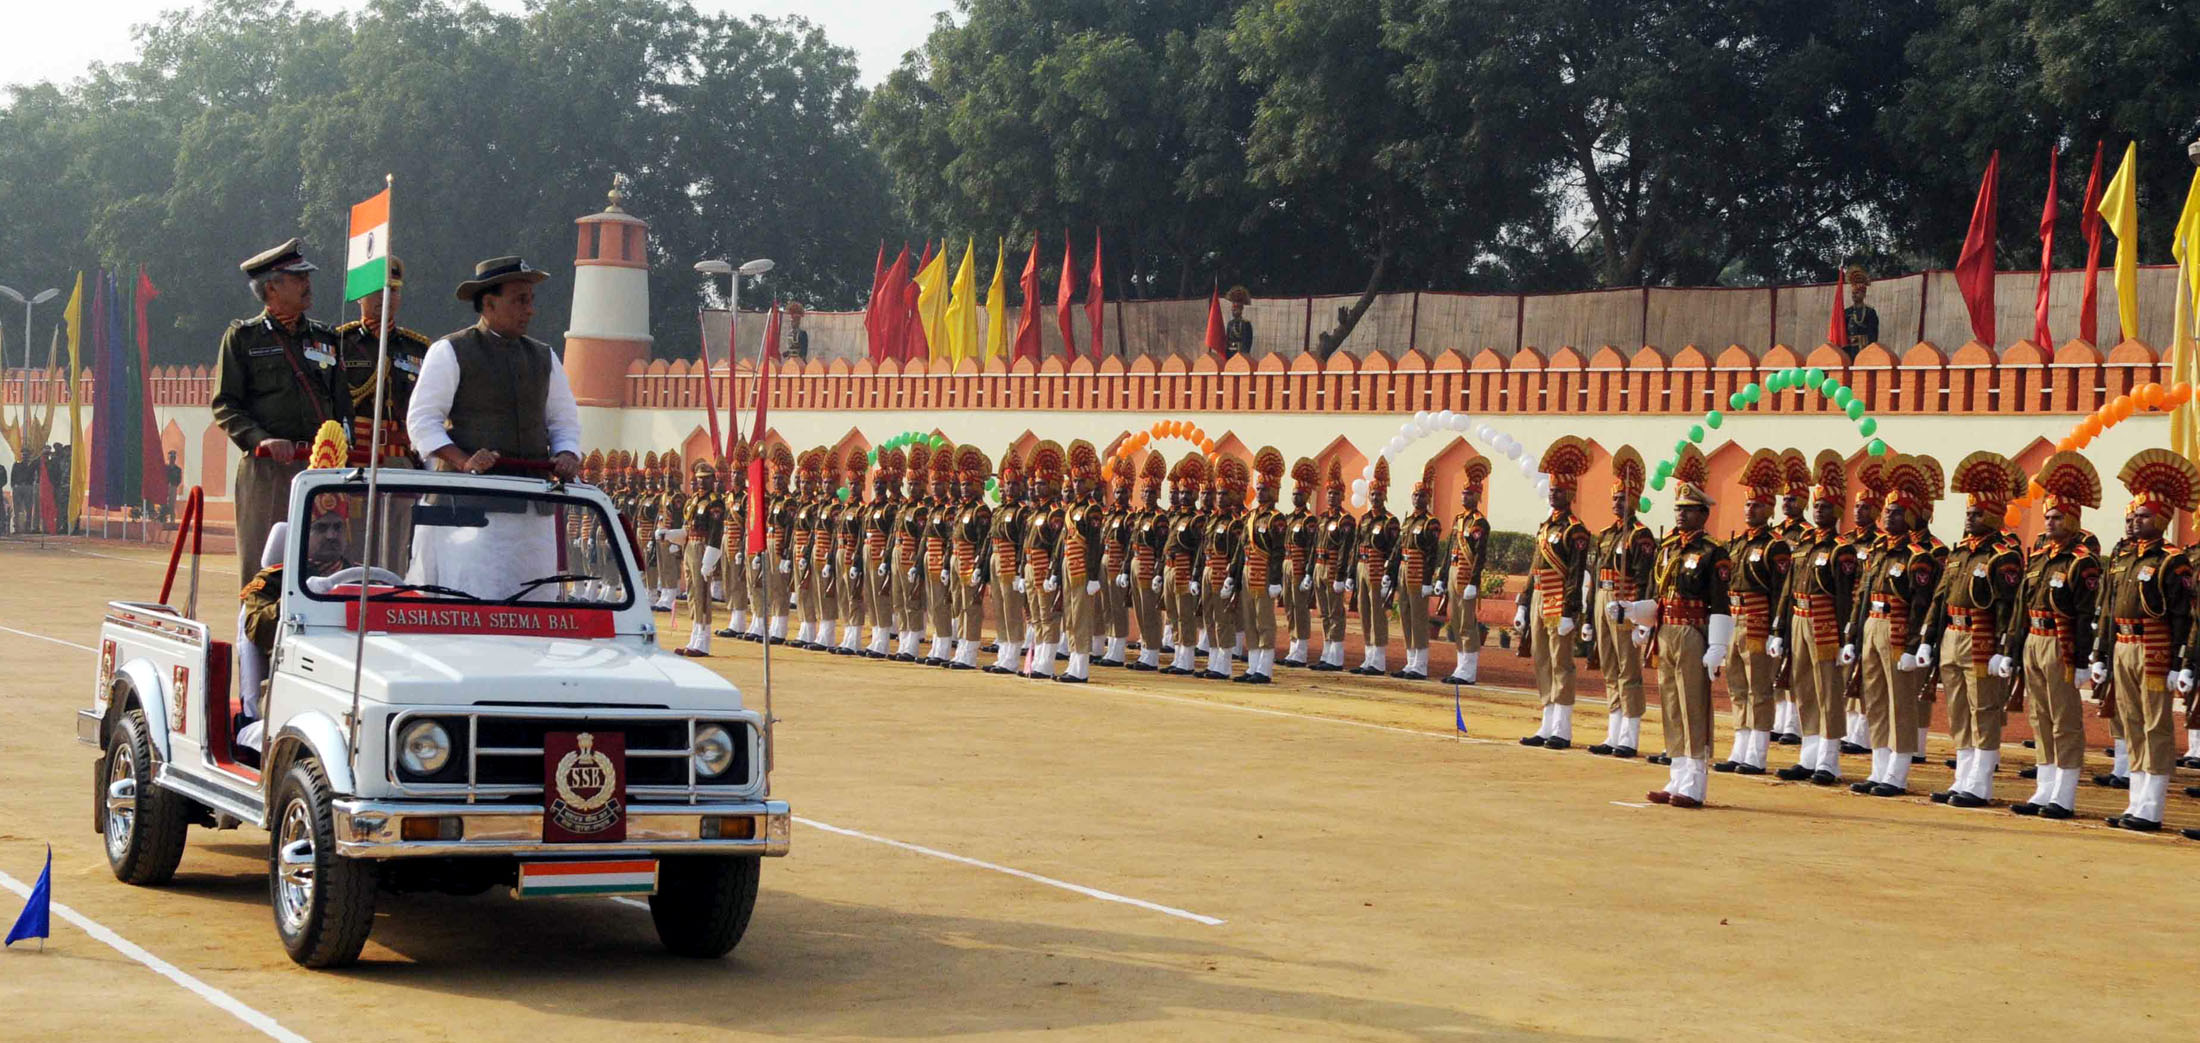 The Union Home Minister, Shri Rajnath Singh inspecting the Guard of Honour, at the 52nd anniversary parade of Sashastra Seema Bal, in New Delhi on December 24, 2015.